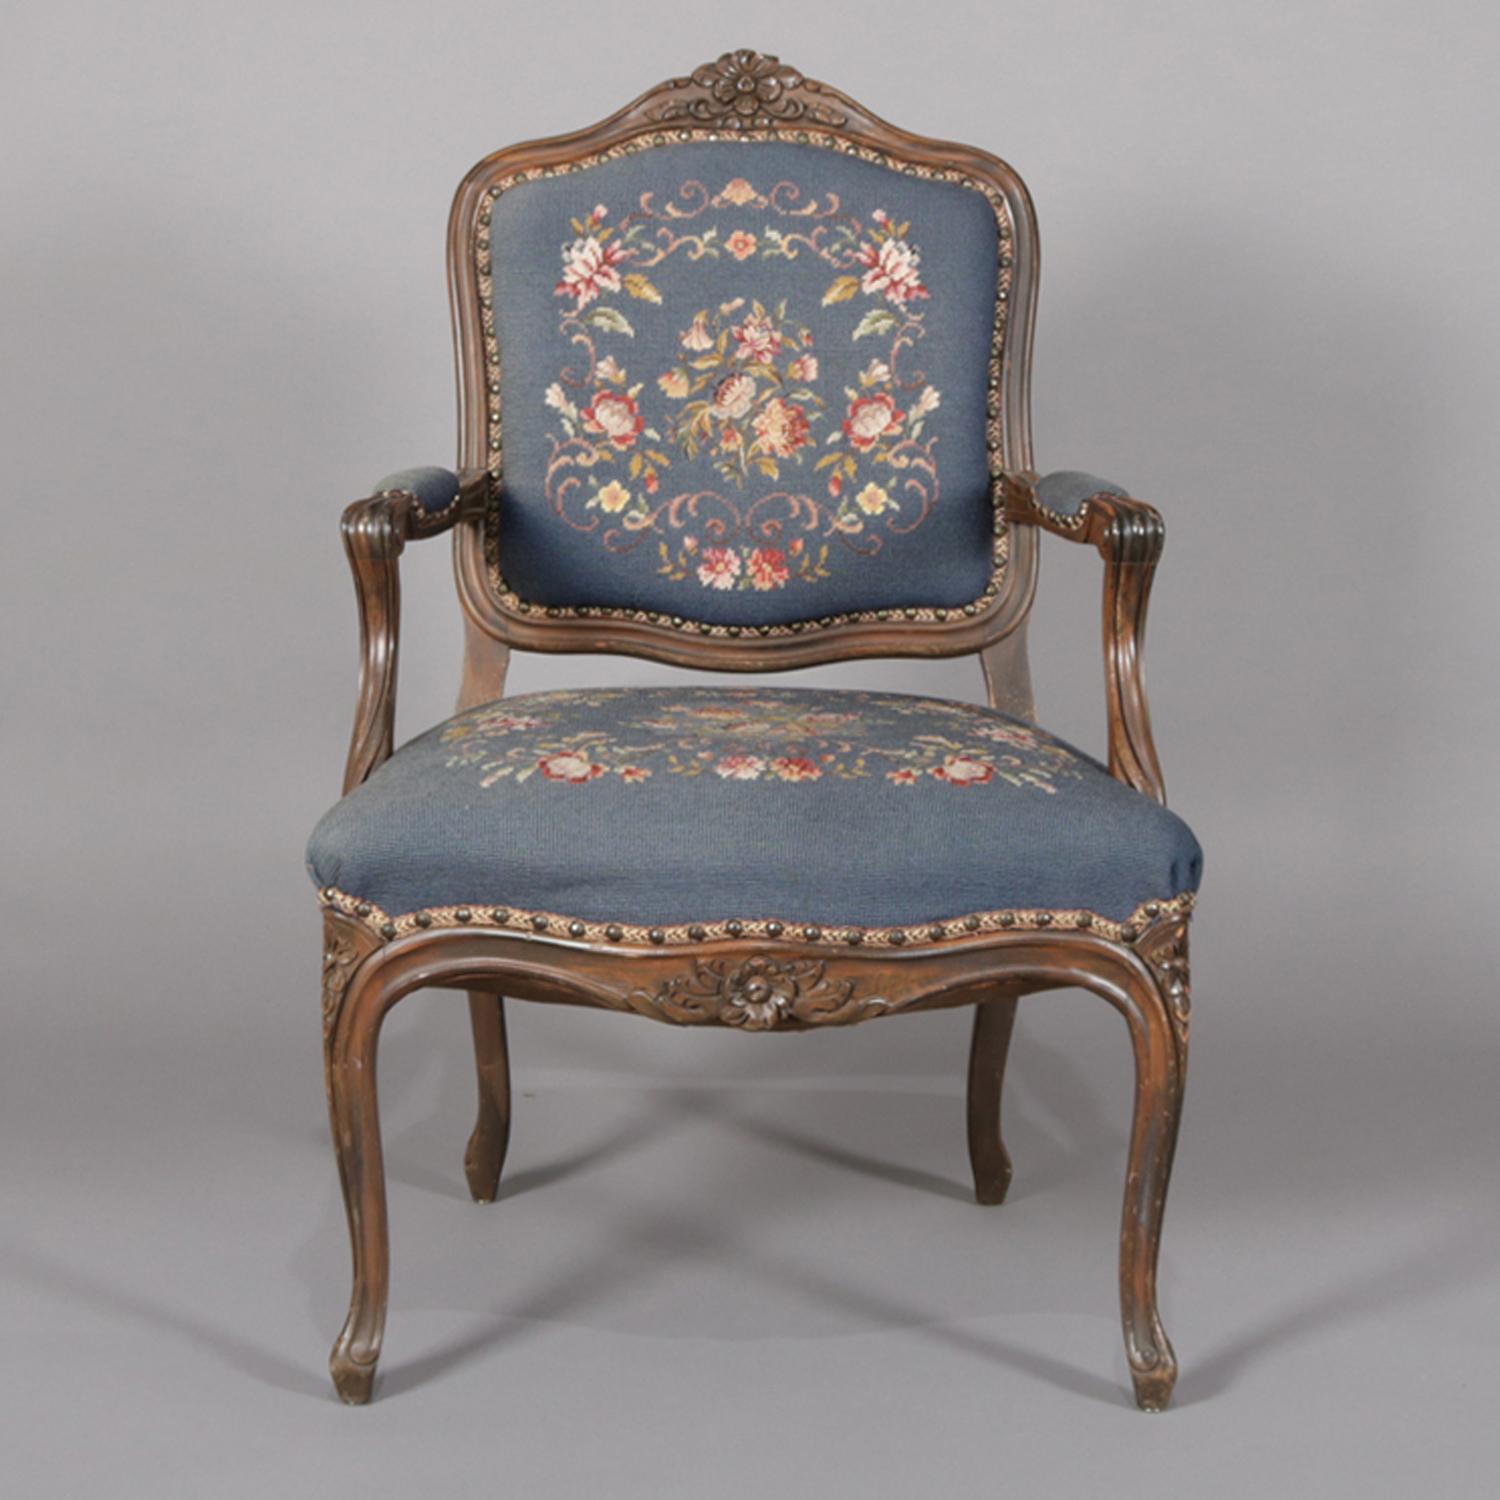 A French Louis XVI style armchair features walnut frame with floral and foliate carved crest, skirt and legs, floral needlepoint upholstered seat, back and arm, raised on cabriole legs, circa 1950.

Measures: 38